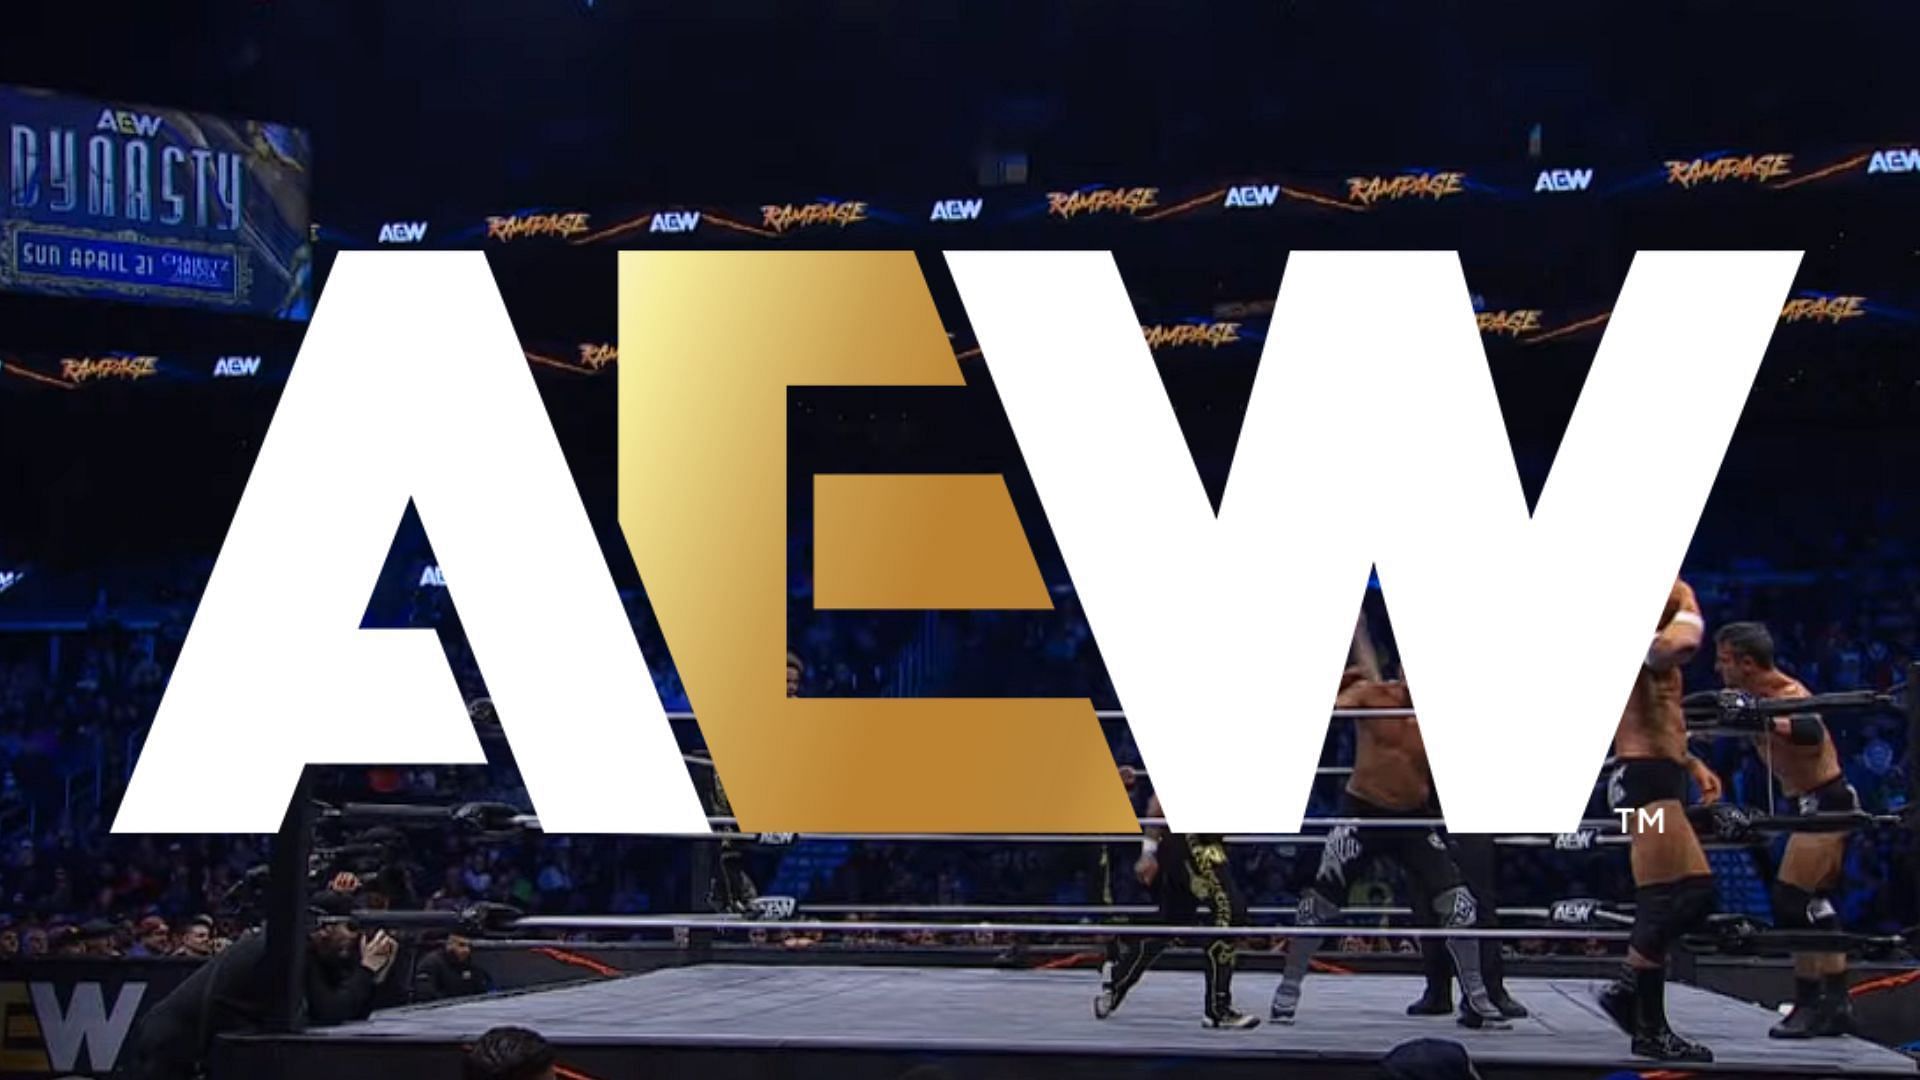 All Elite Wrestling is a Jacksonville-based promotion led by Tony Khan [Photo courtesy of AEW